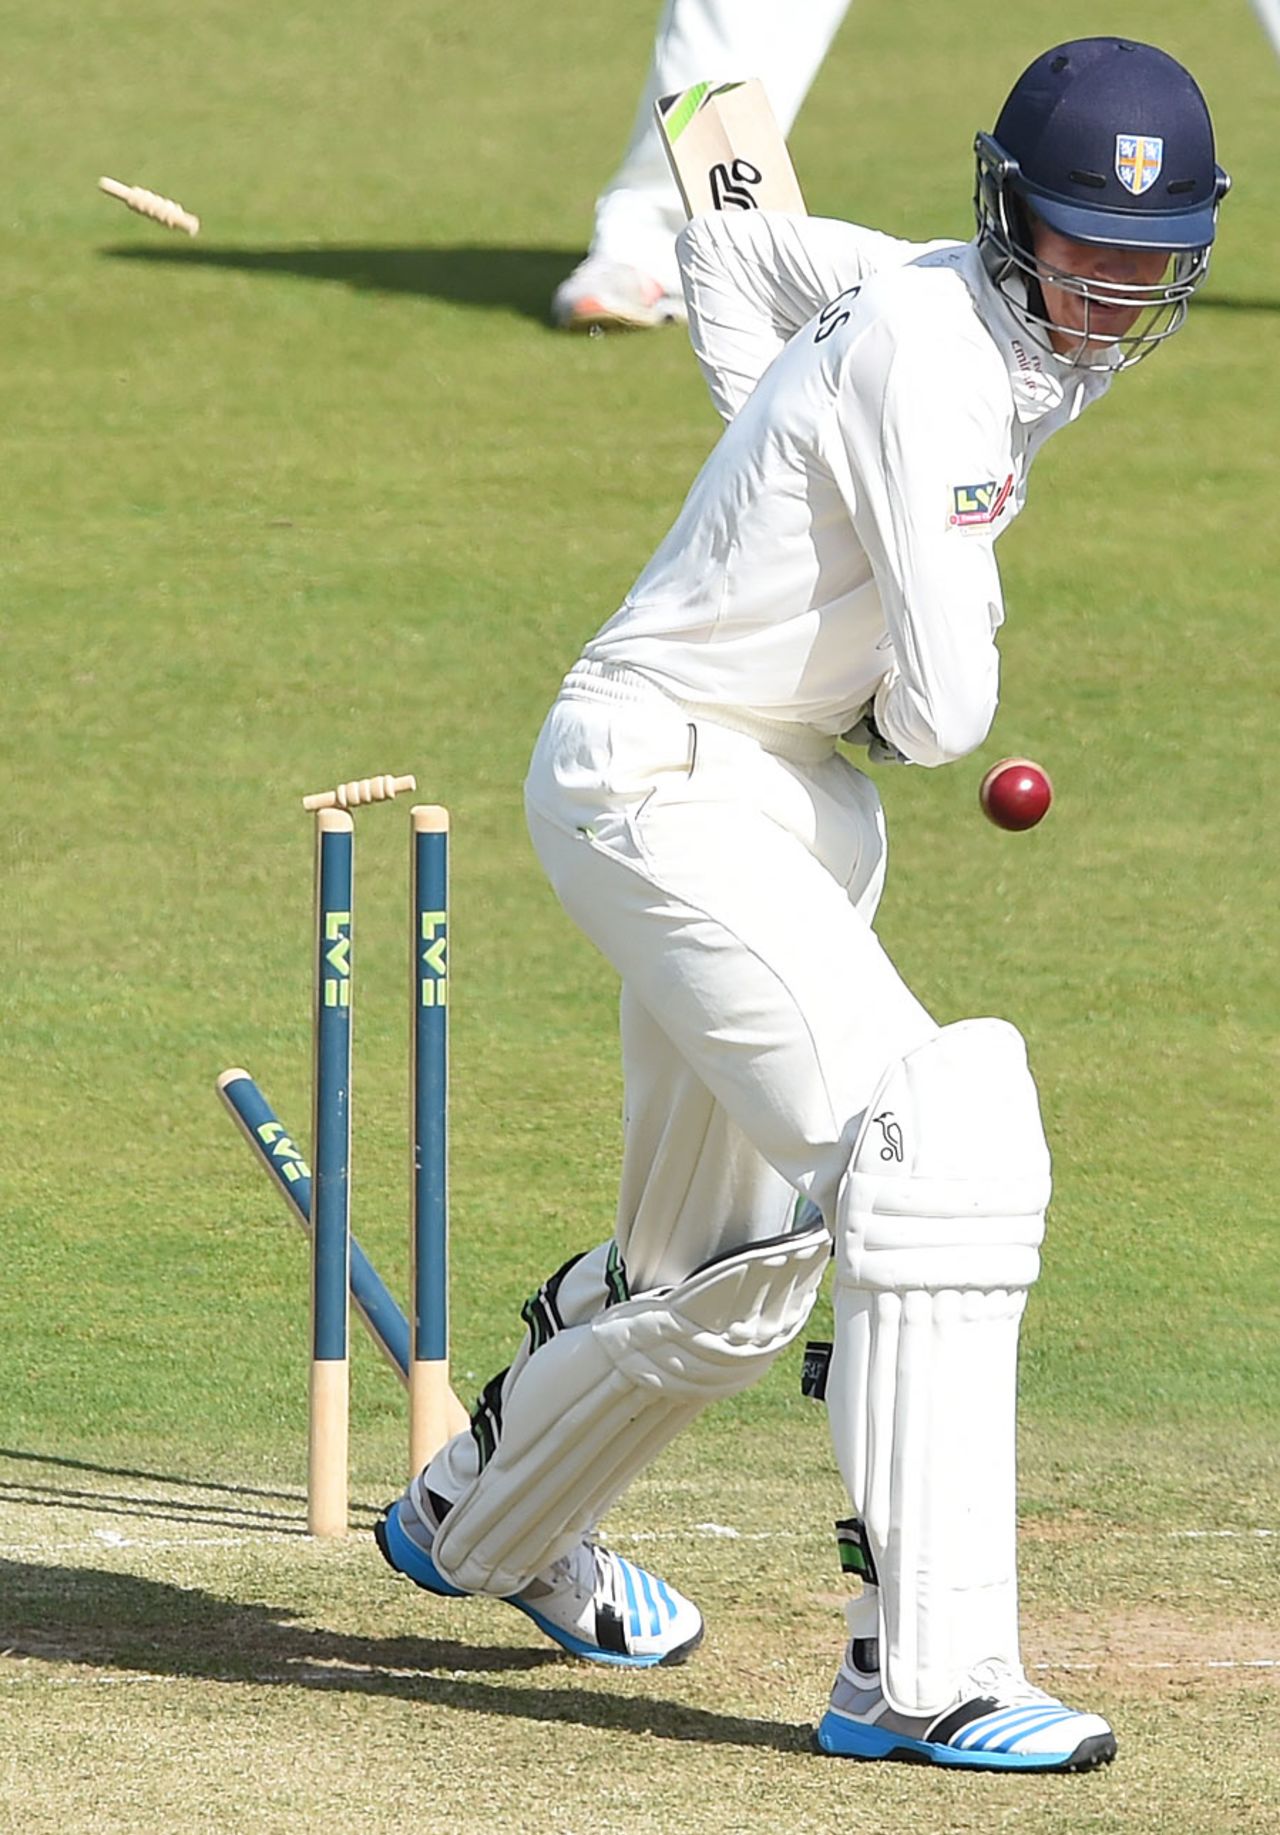 Dodgy leave: Keaton Jennings loses his off stump, Durham v Nottinghamshire, County Championship, Division One, Chester-le-Street, August 31, 2014